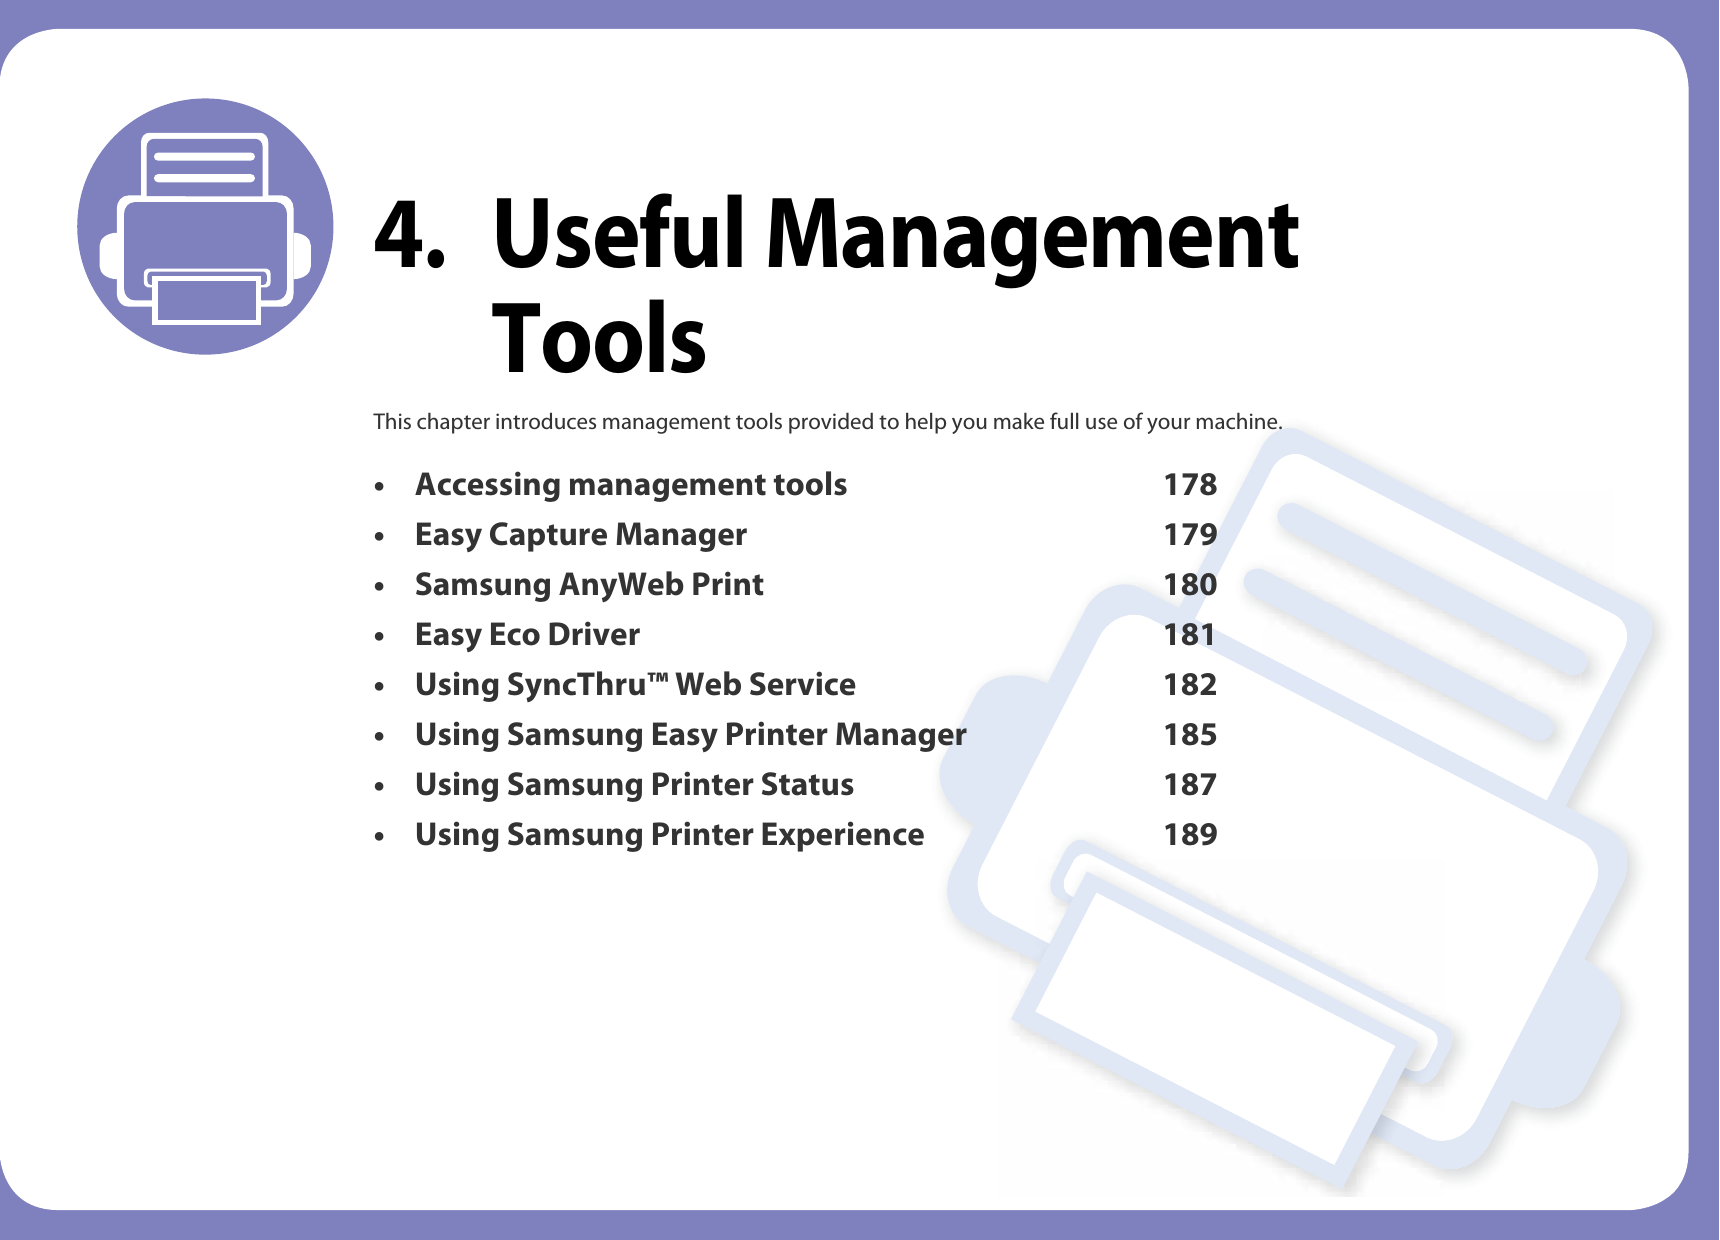 4. Useful Management ToolsThis chapter introduces management tools provided to help you make full use of your machine. • Accessing management tools 178• Easy Capture Manager 179• Samsung AnyWeb Print 180• Easy Eco Driver 181 • Using SyncThru™ Web Service 182• Using Samsung Easy Printer Manager 185• Using Samsung Printer Status 187• Using Samsung Printer Experience 189